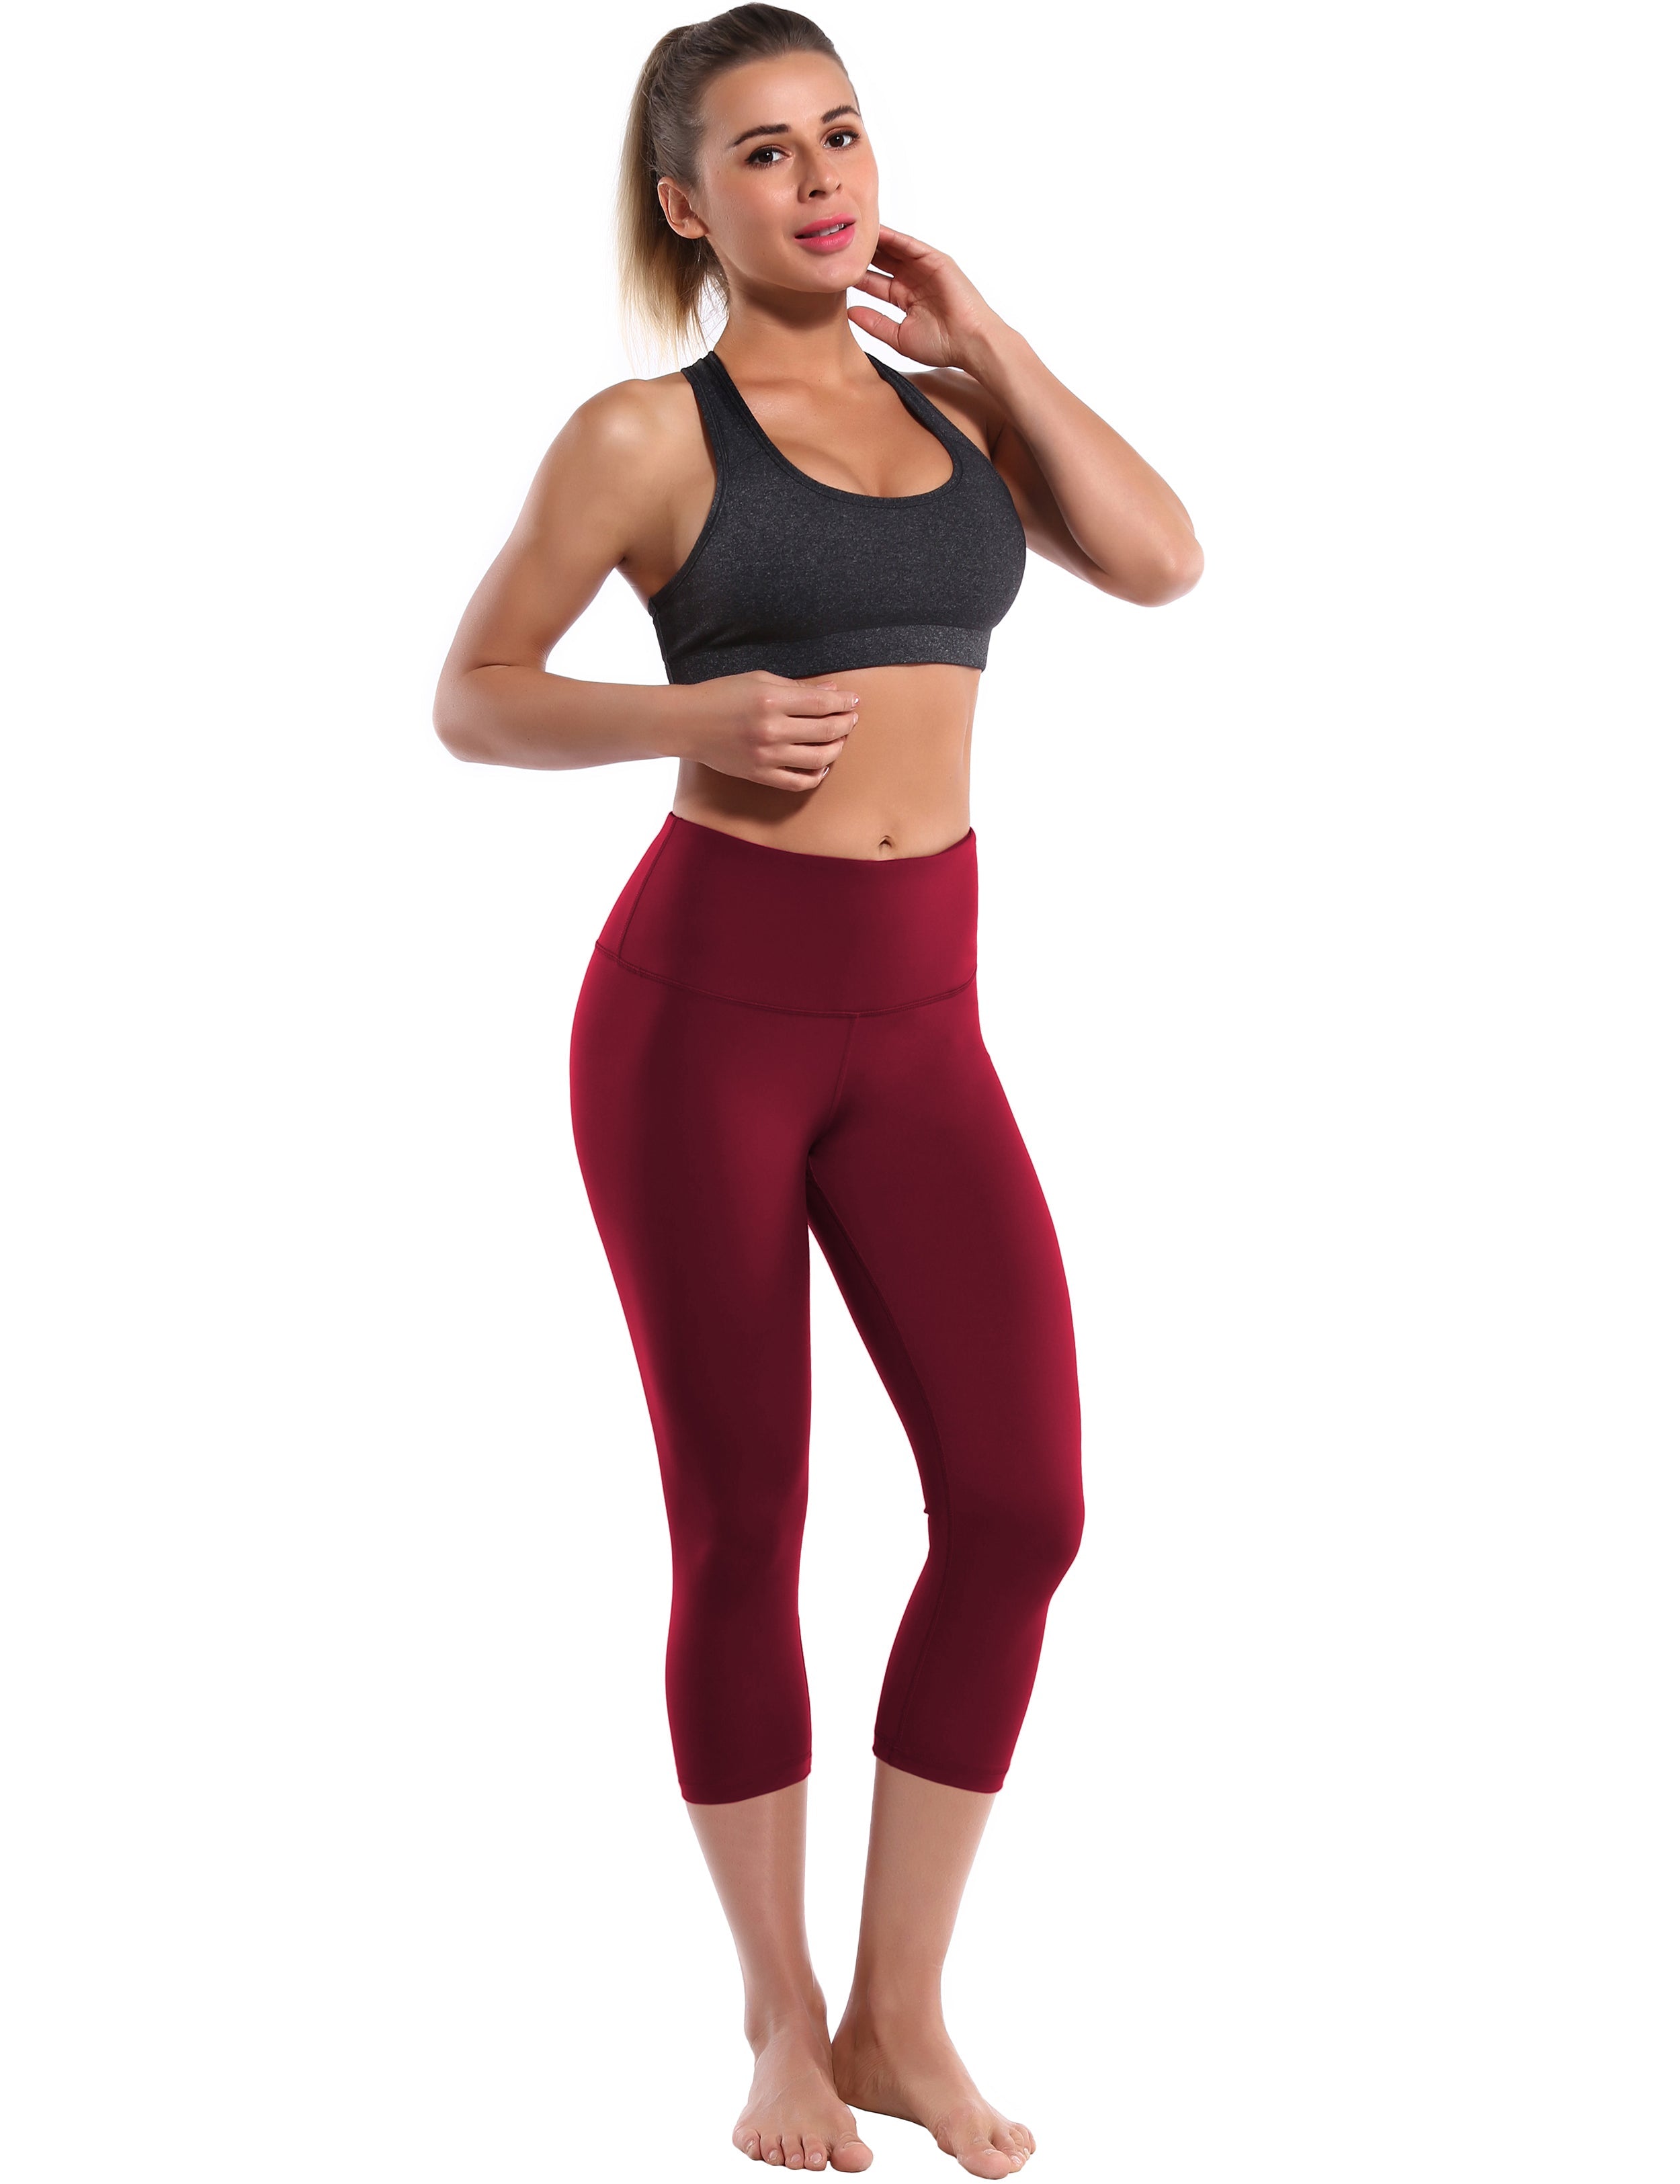 19" High Waist Crop Tight Capris cherryred 75%Nylon/25%Spandex Fabric doesn't attract lint easily 4-way stretch No see-through Moisture-wicking Tummy control Inner pocket